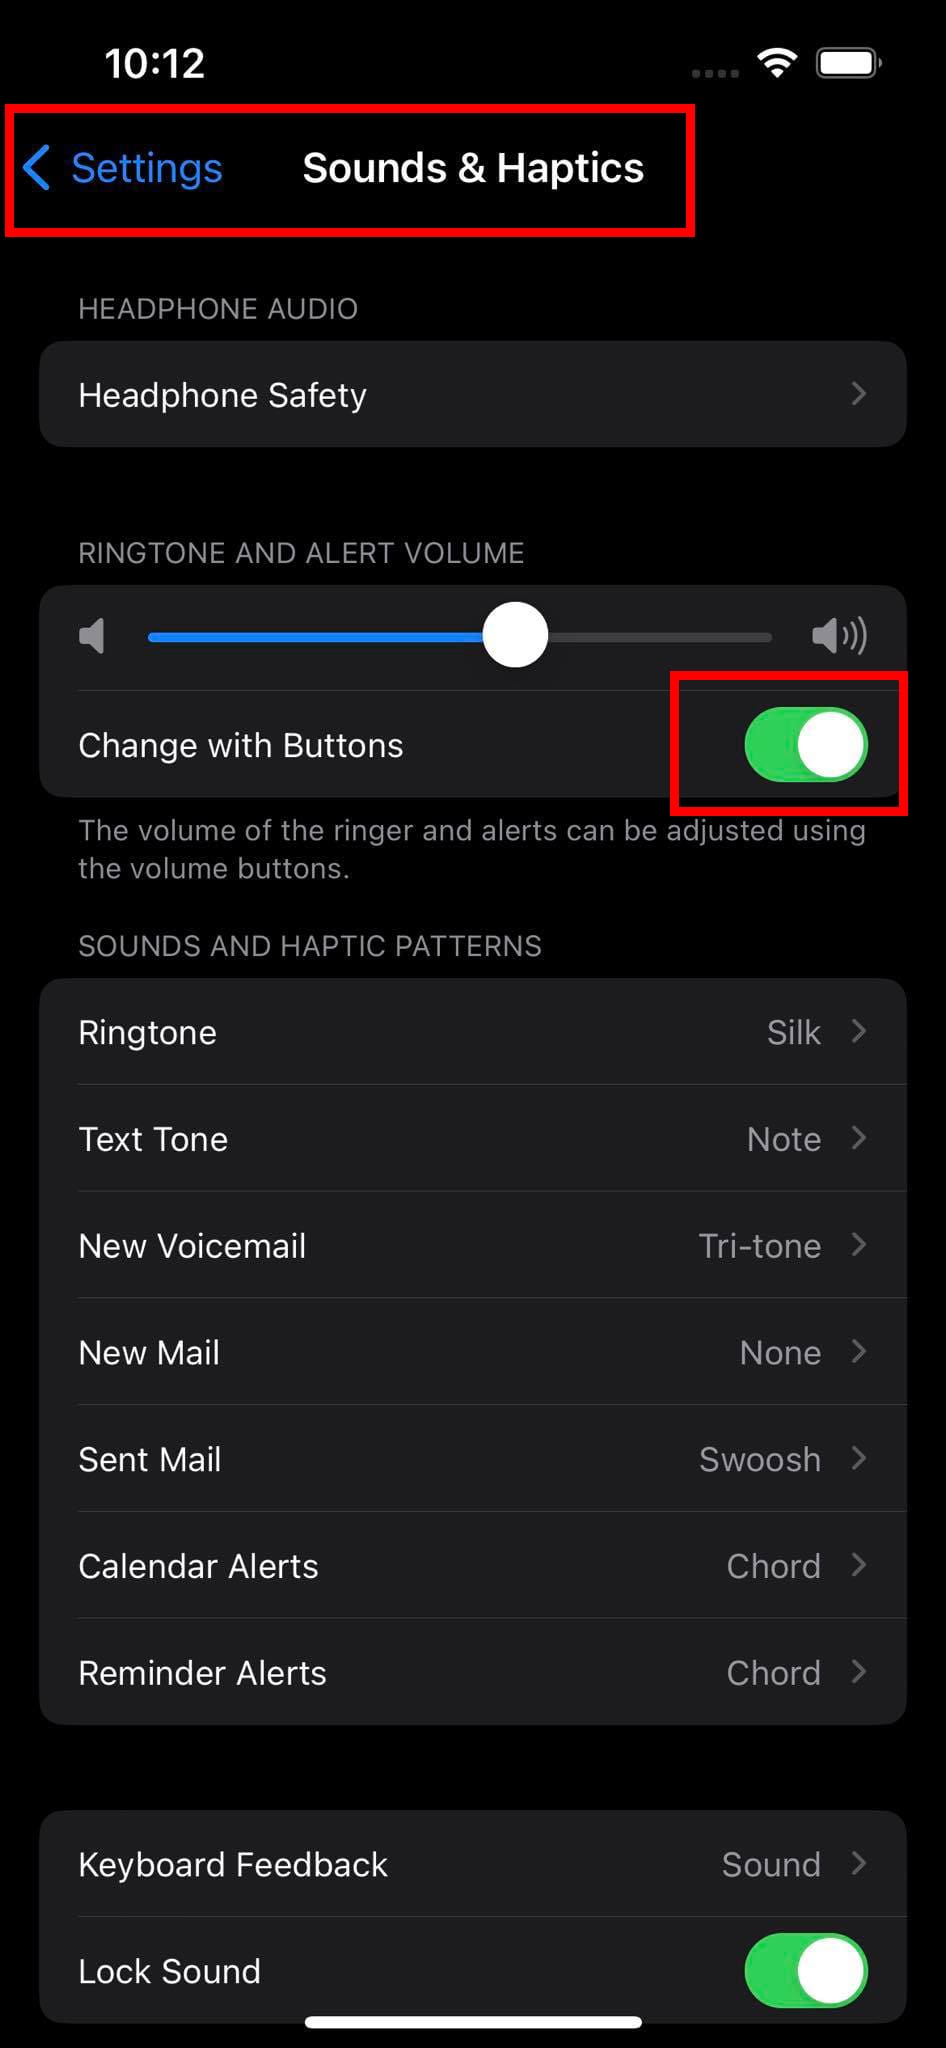 The location of the Change with Buttons command on iPhone Settings